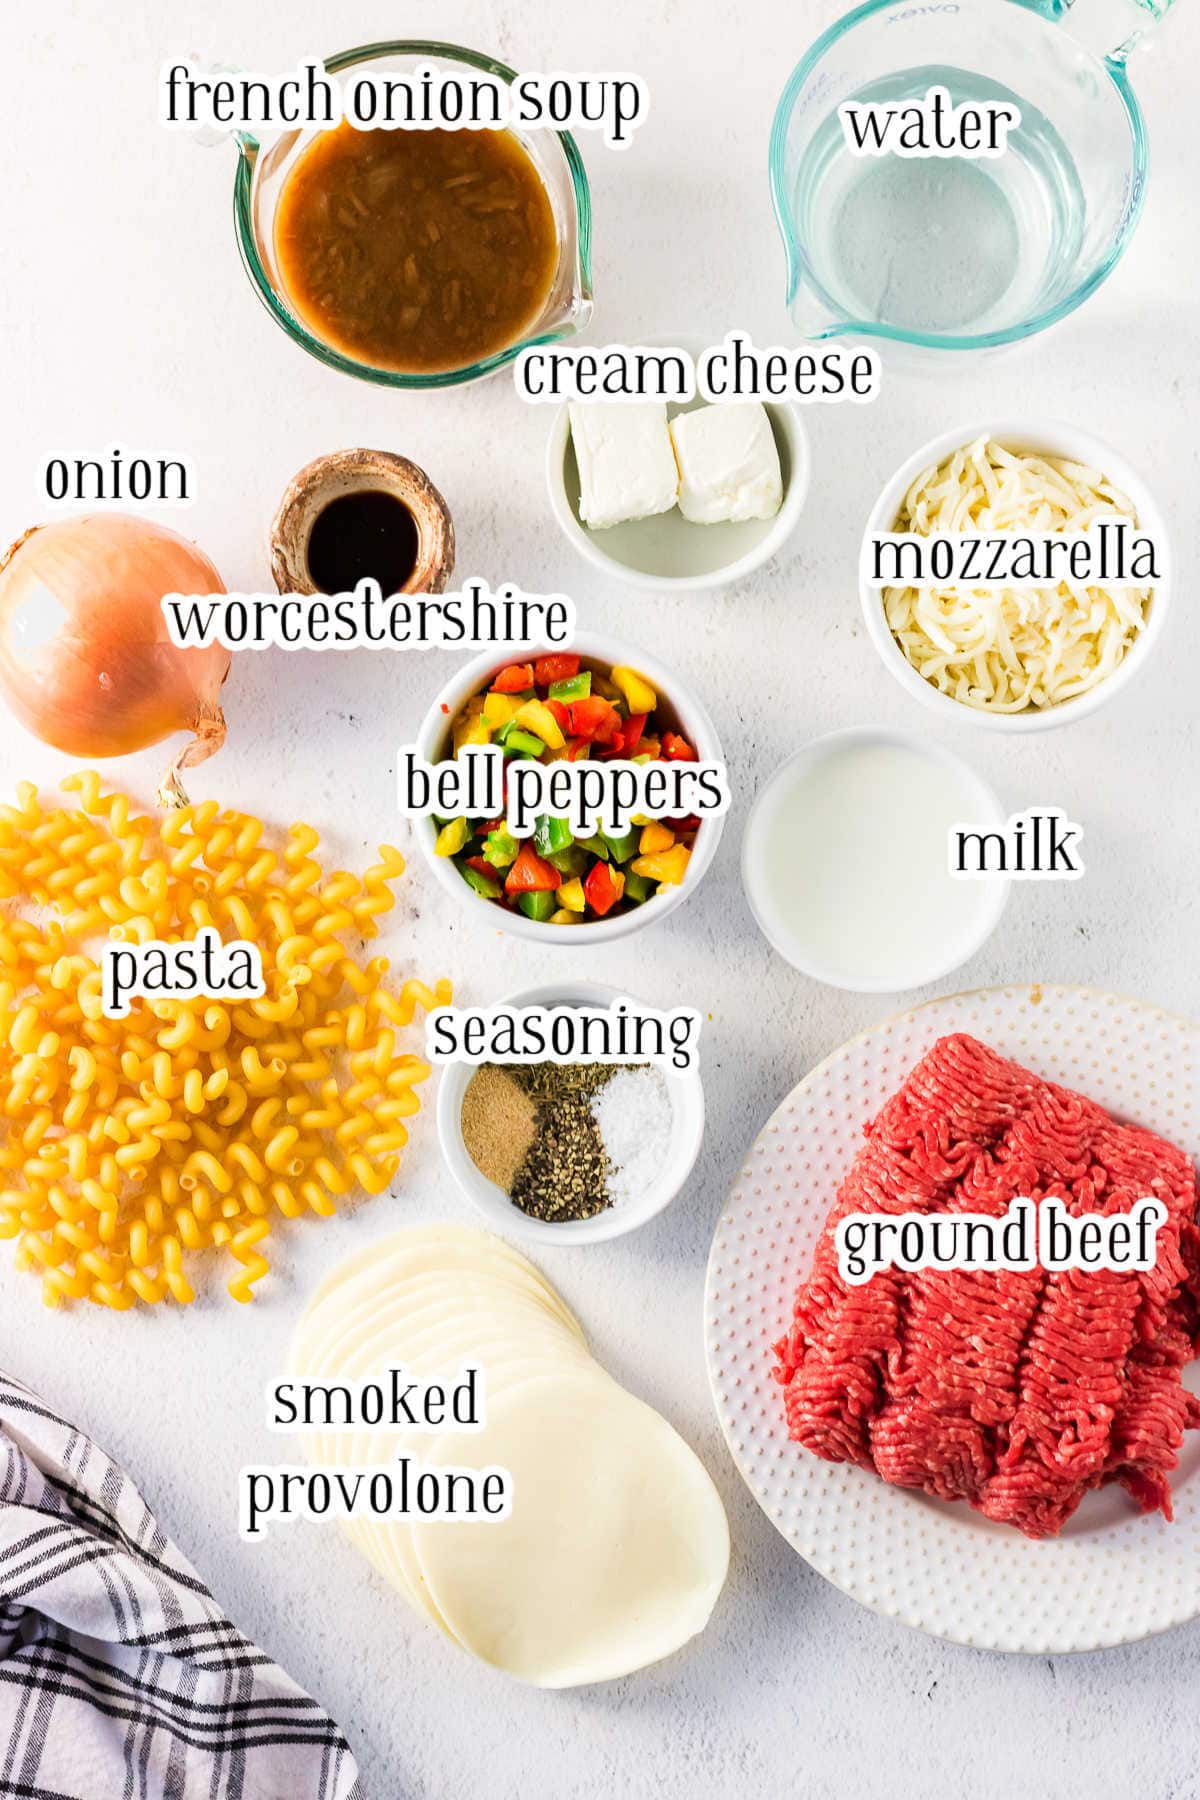 Labeled ingredients for this pasta recipe.